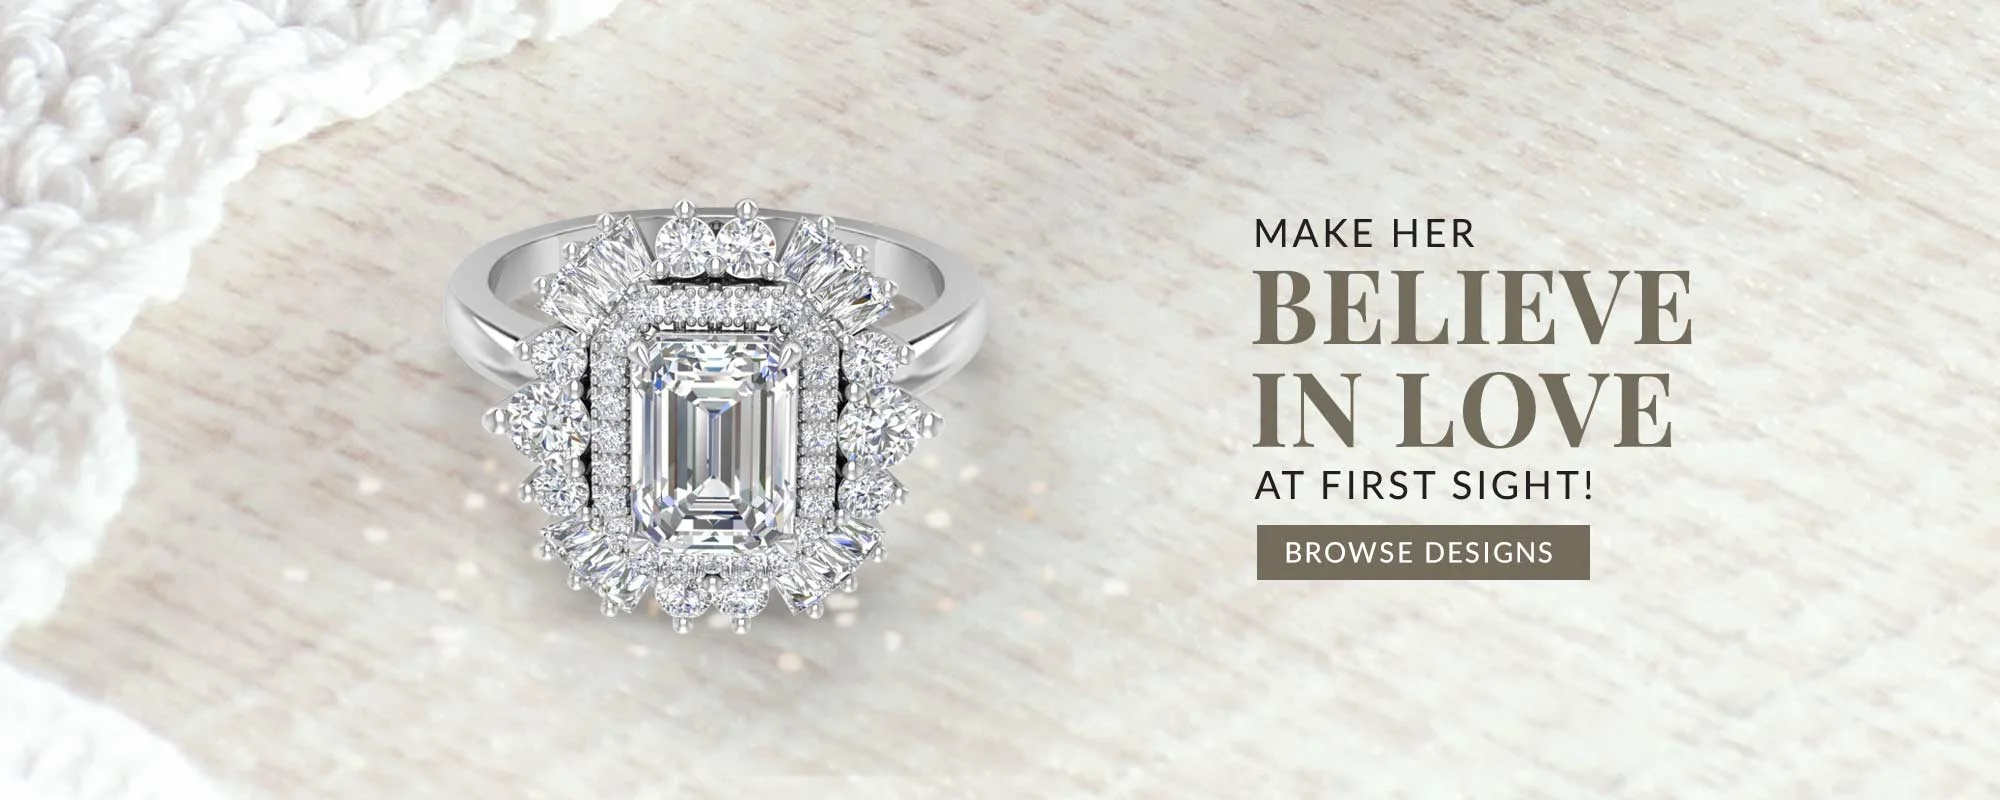 Diamond Engagement Rings at Leightons Jewelers